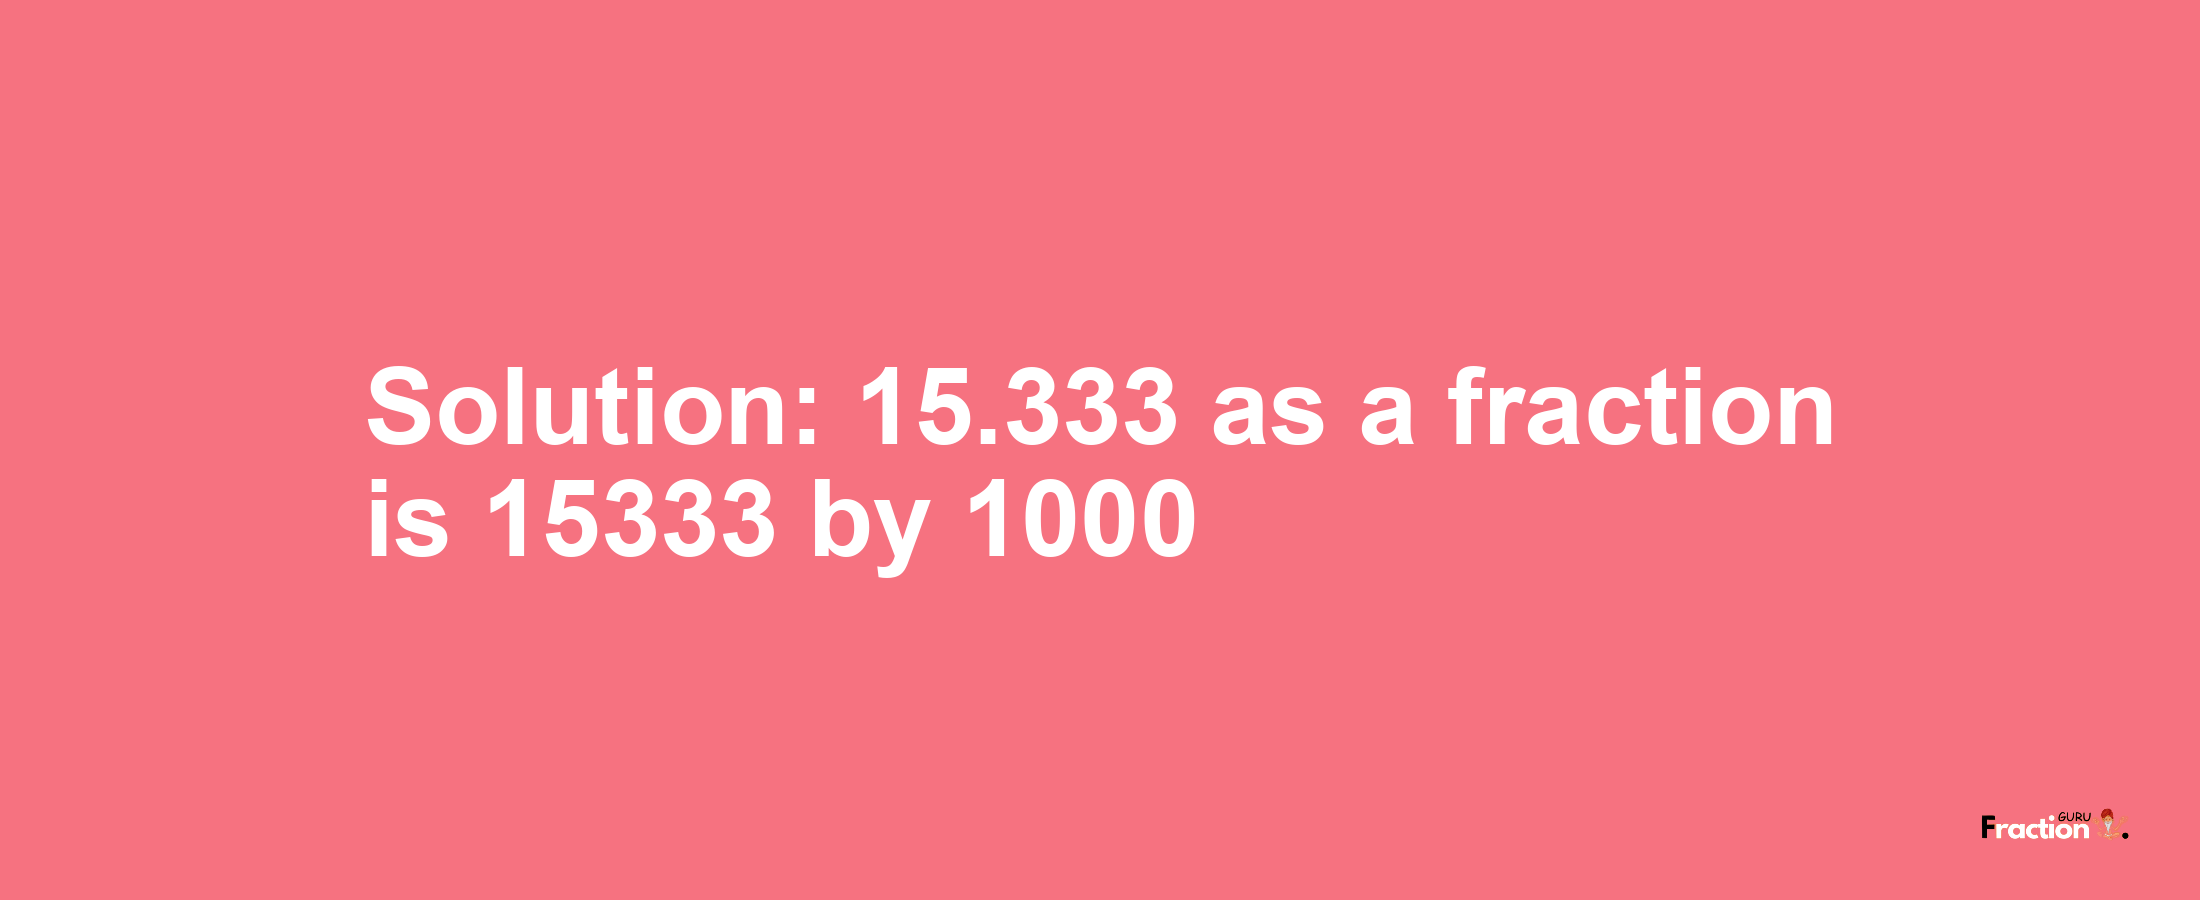 Solution:15.333 as a fraction is 15333/1000